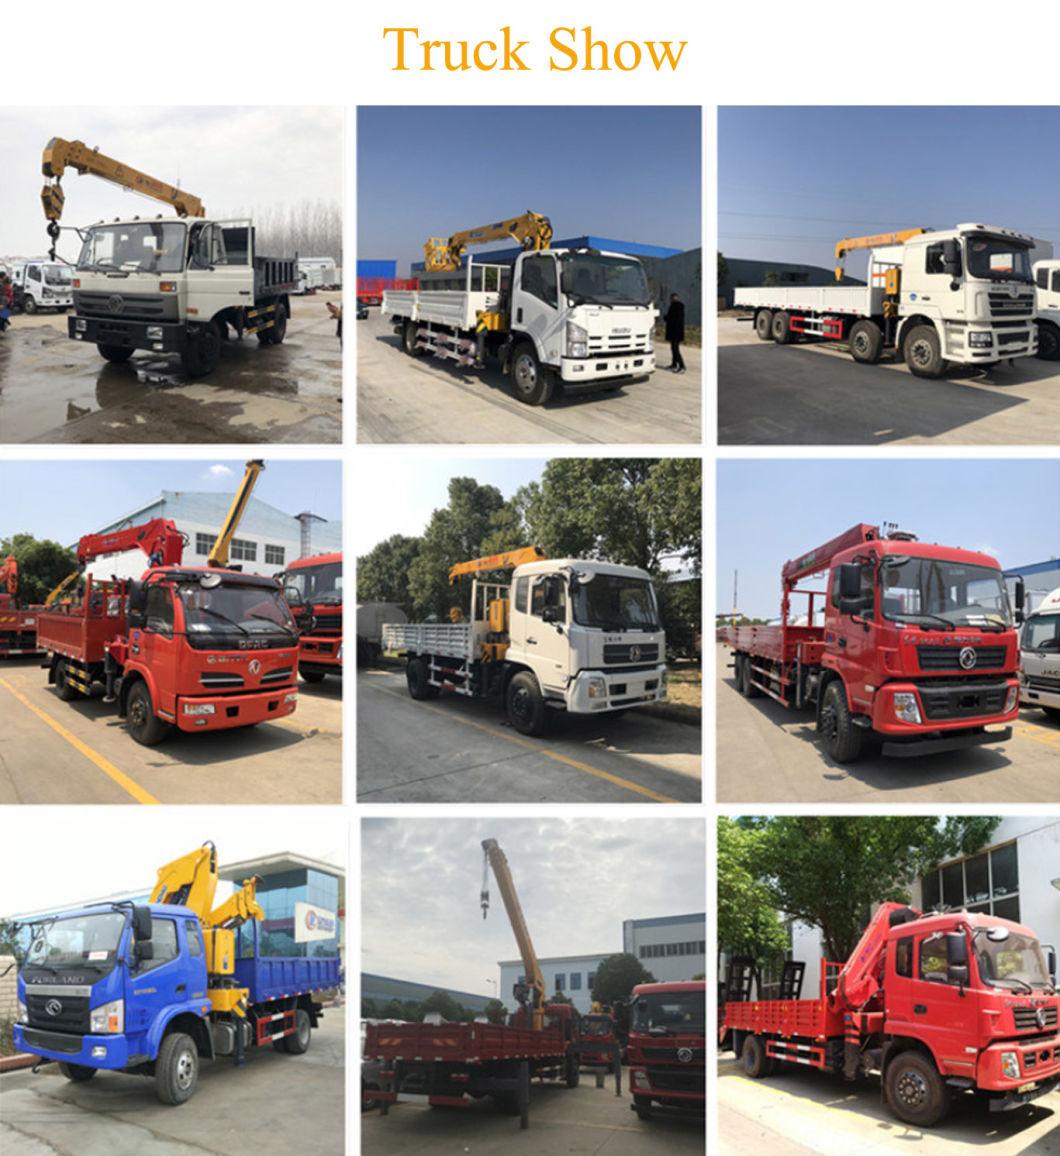 Sinotruk HOWO 5tons Truck Mounted Telescopic Boom Crane for Construction Material Transportation